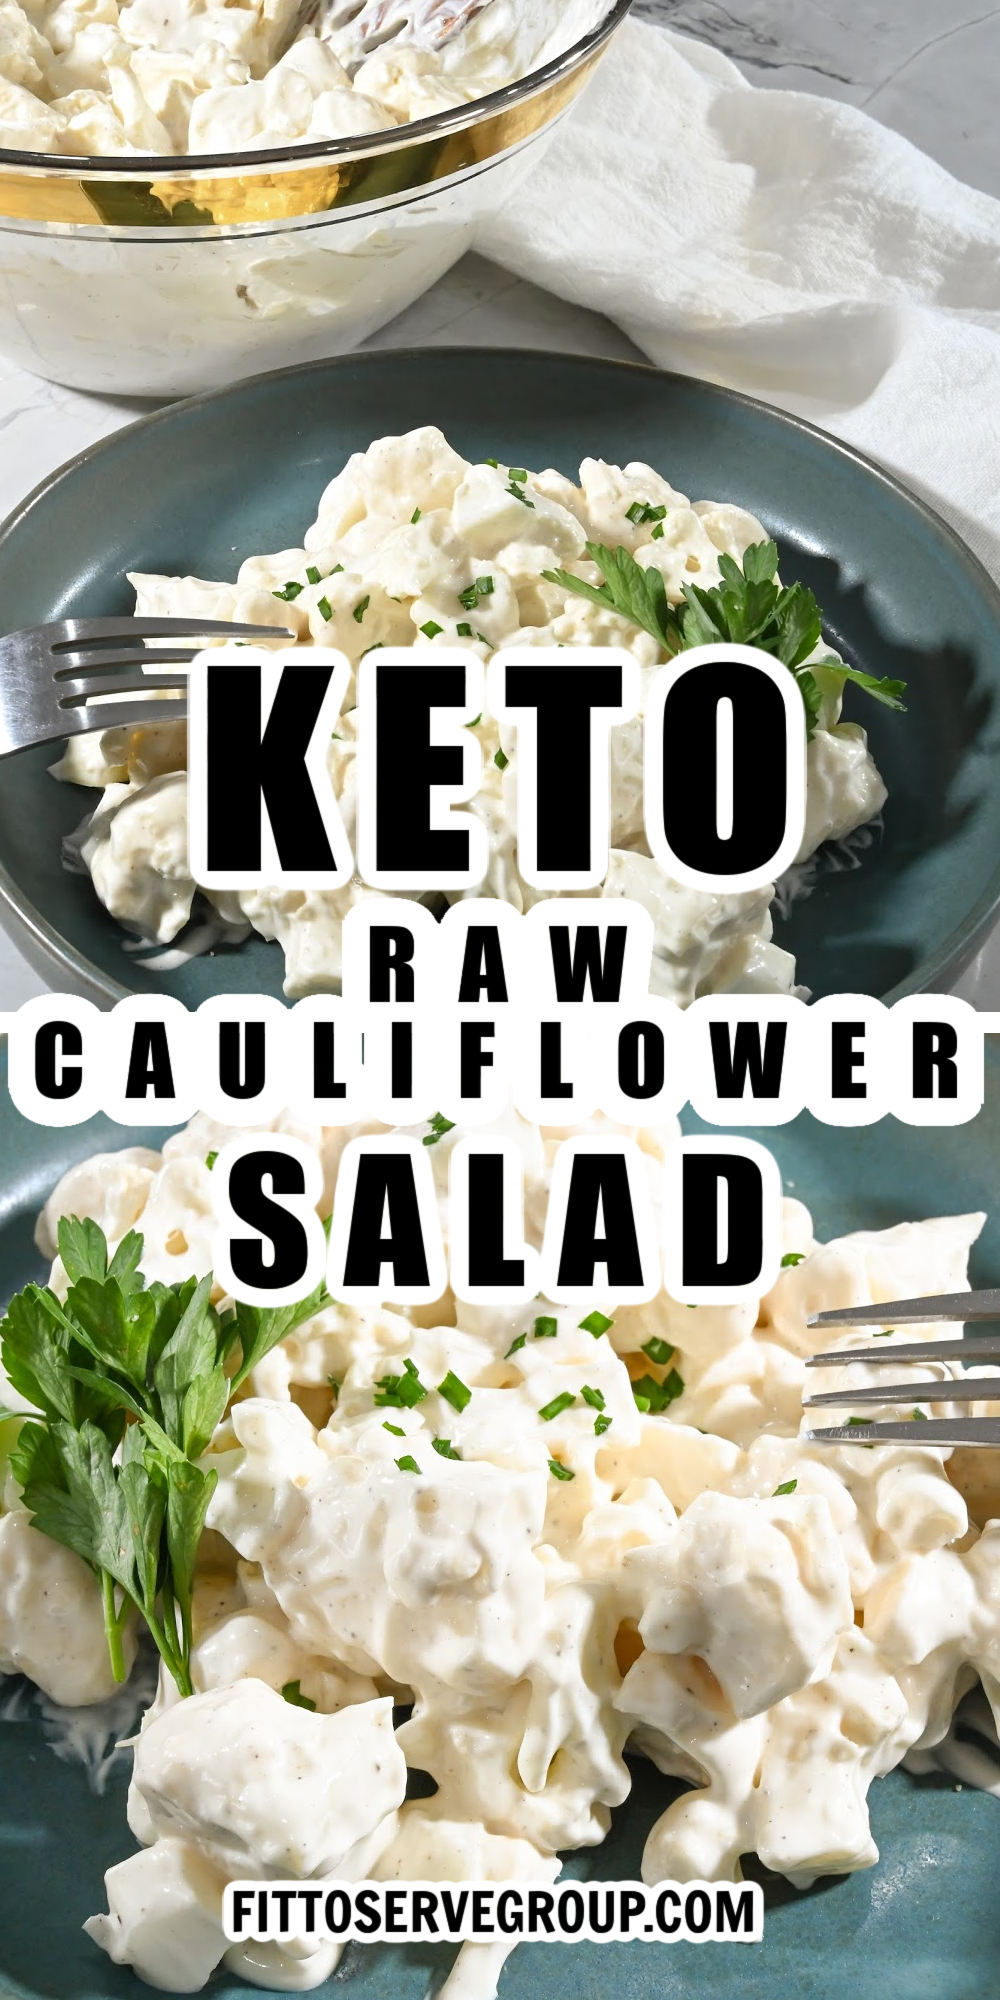 keto raw cauliflower served in a teal plate with a marble background